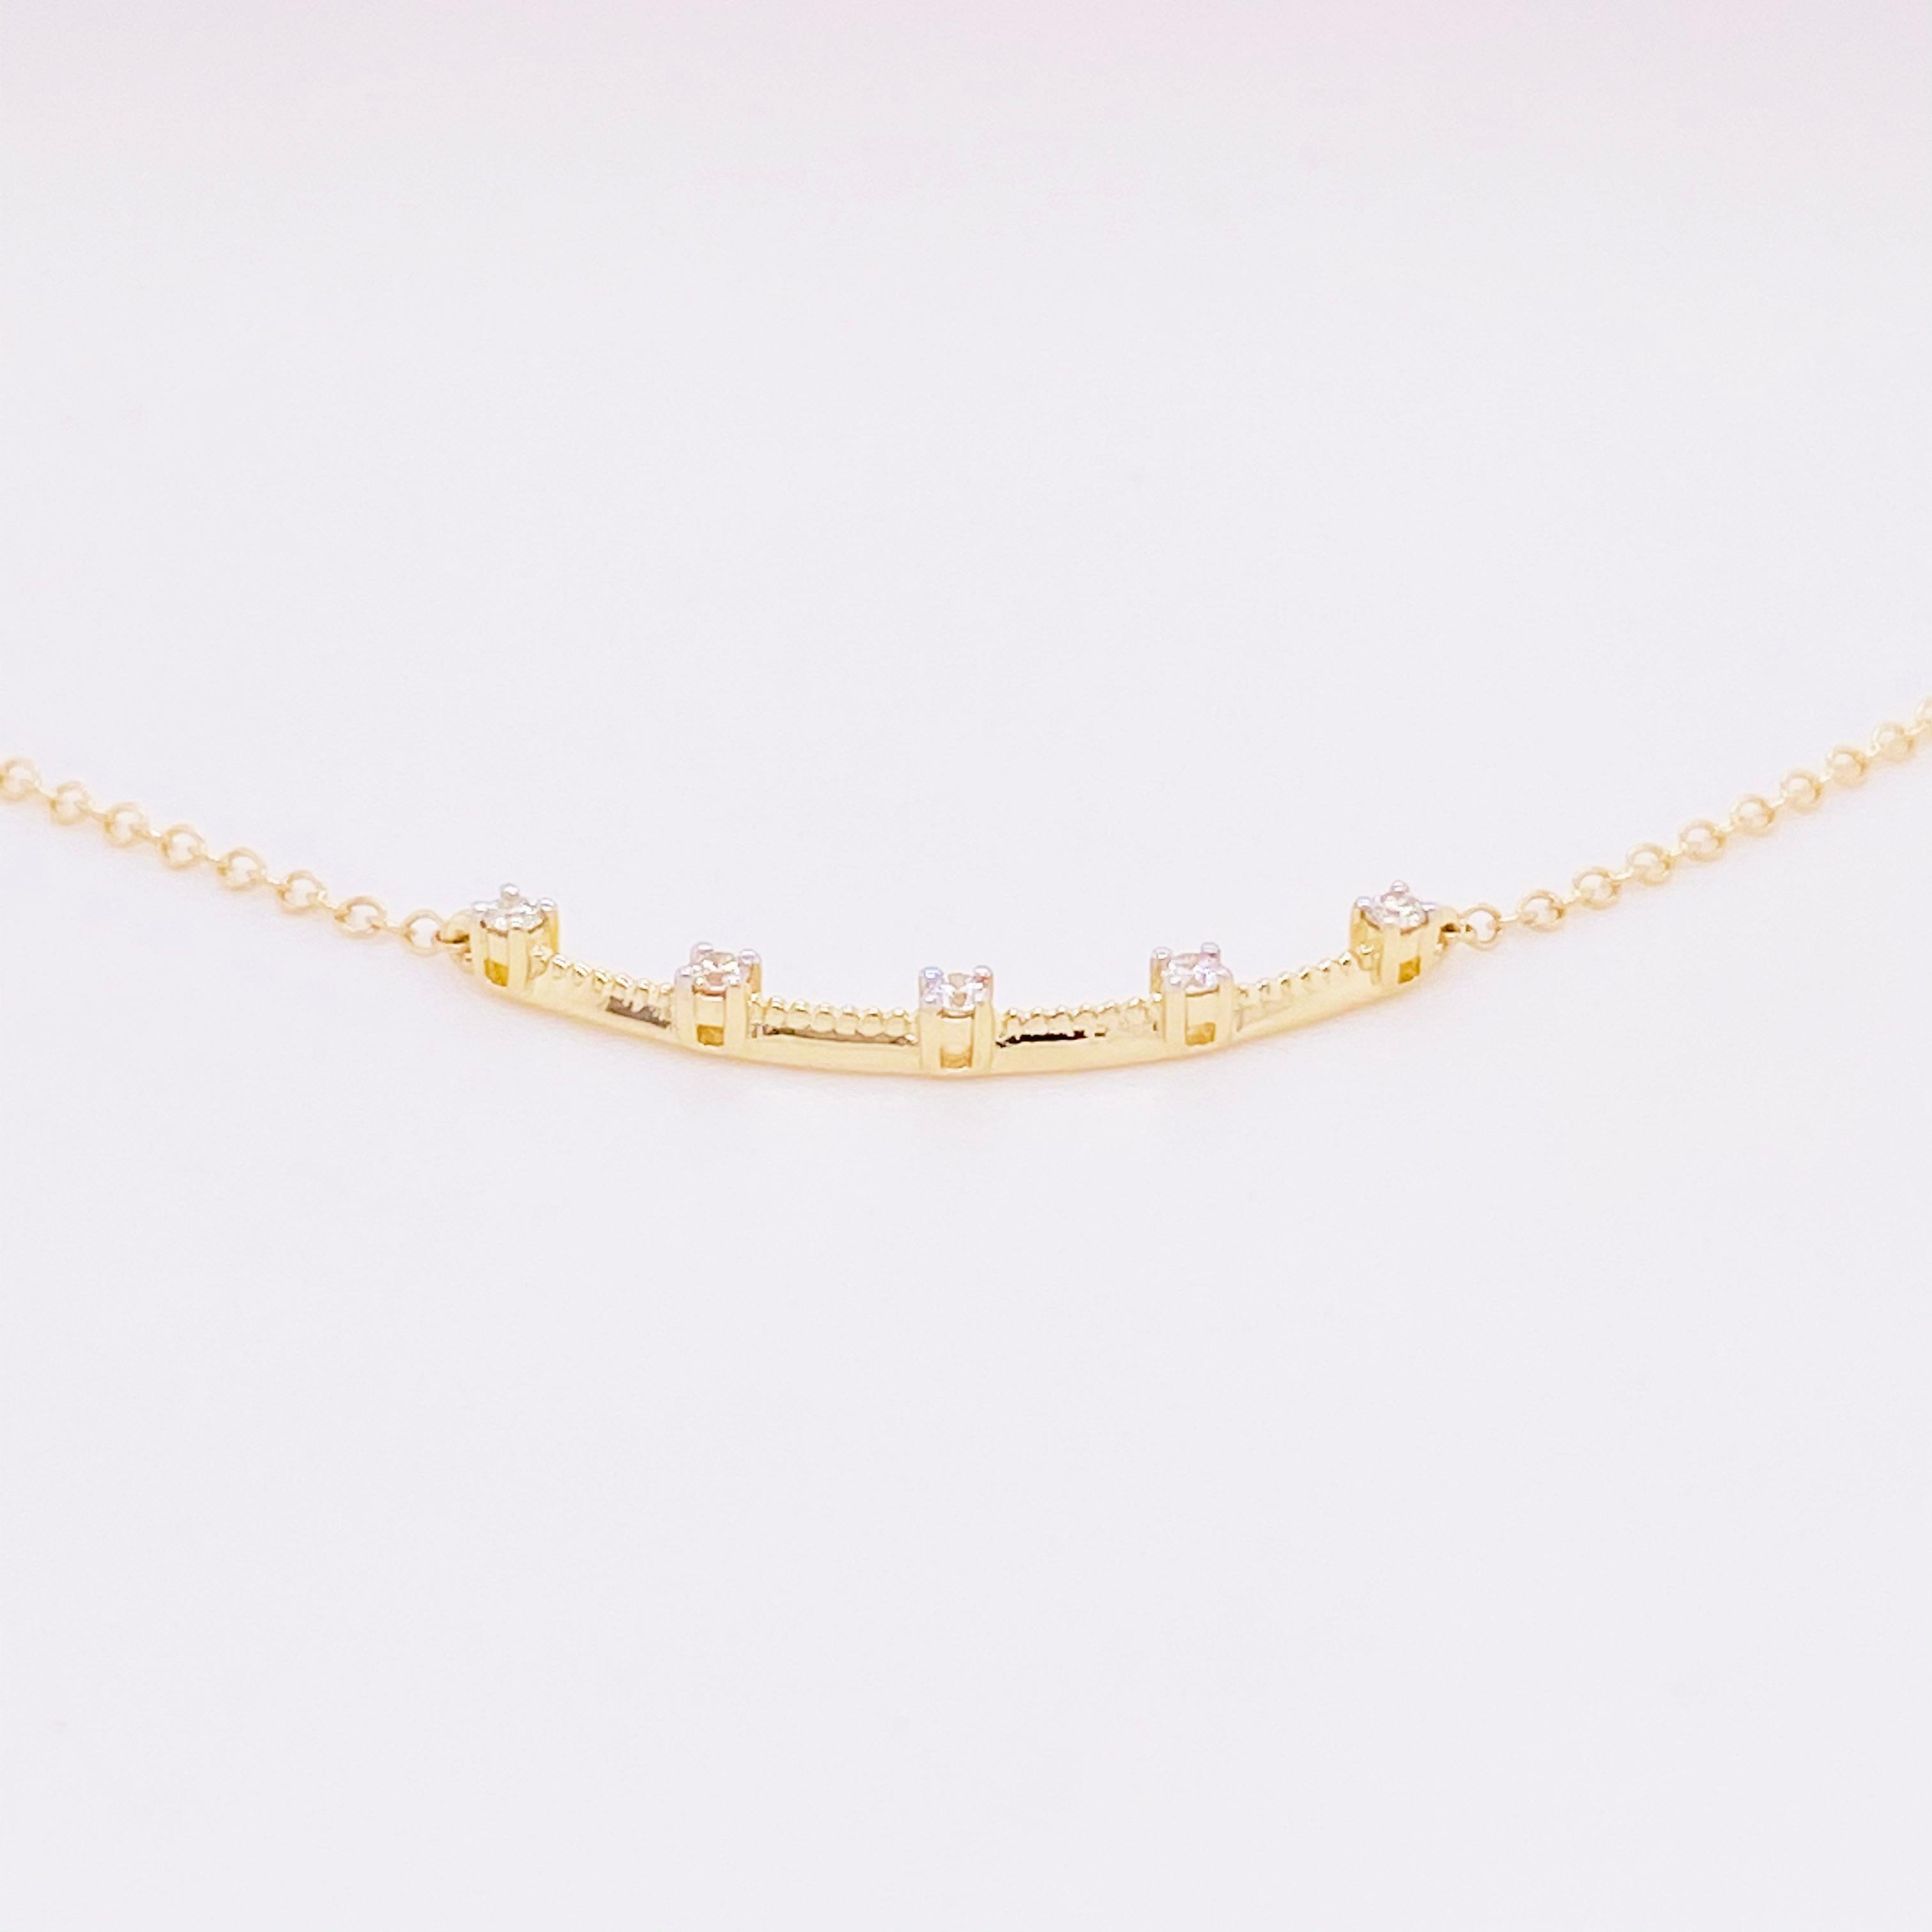 Modern Diamond Bar Necklace, 14 Karat Yellow Gold, Curved Bar Necklace, NK6137Y45JJ For Sale